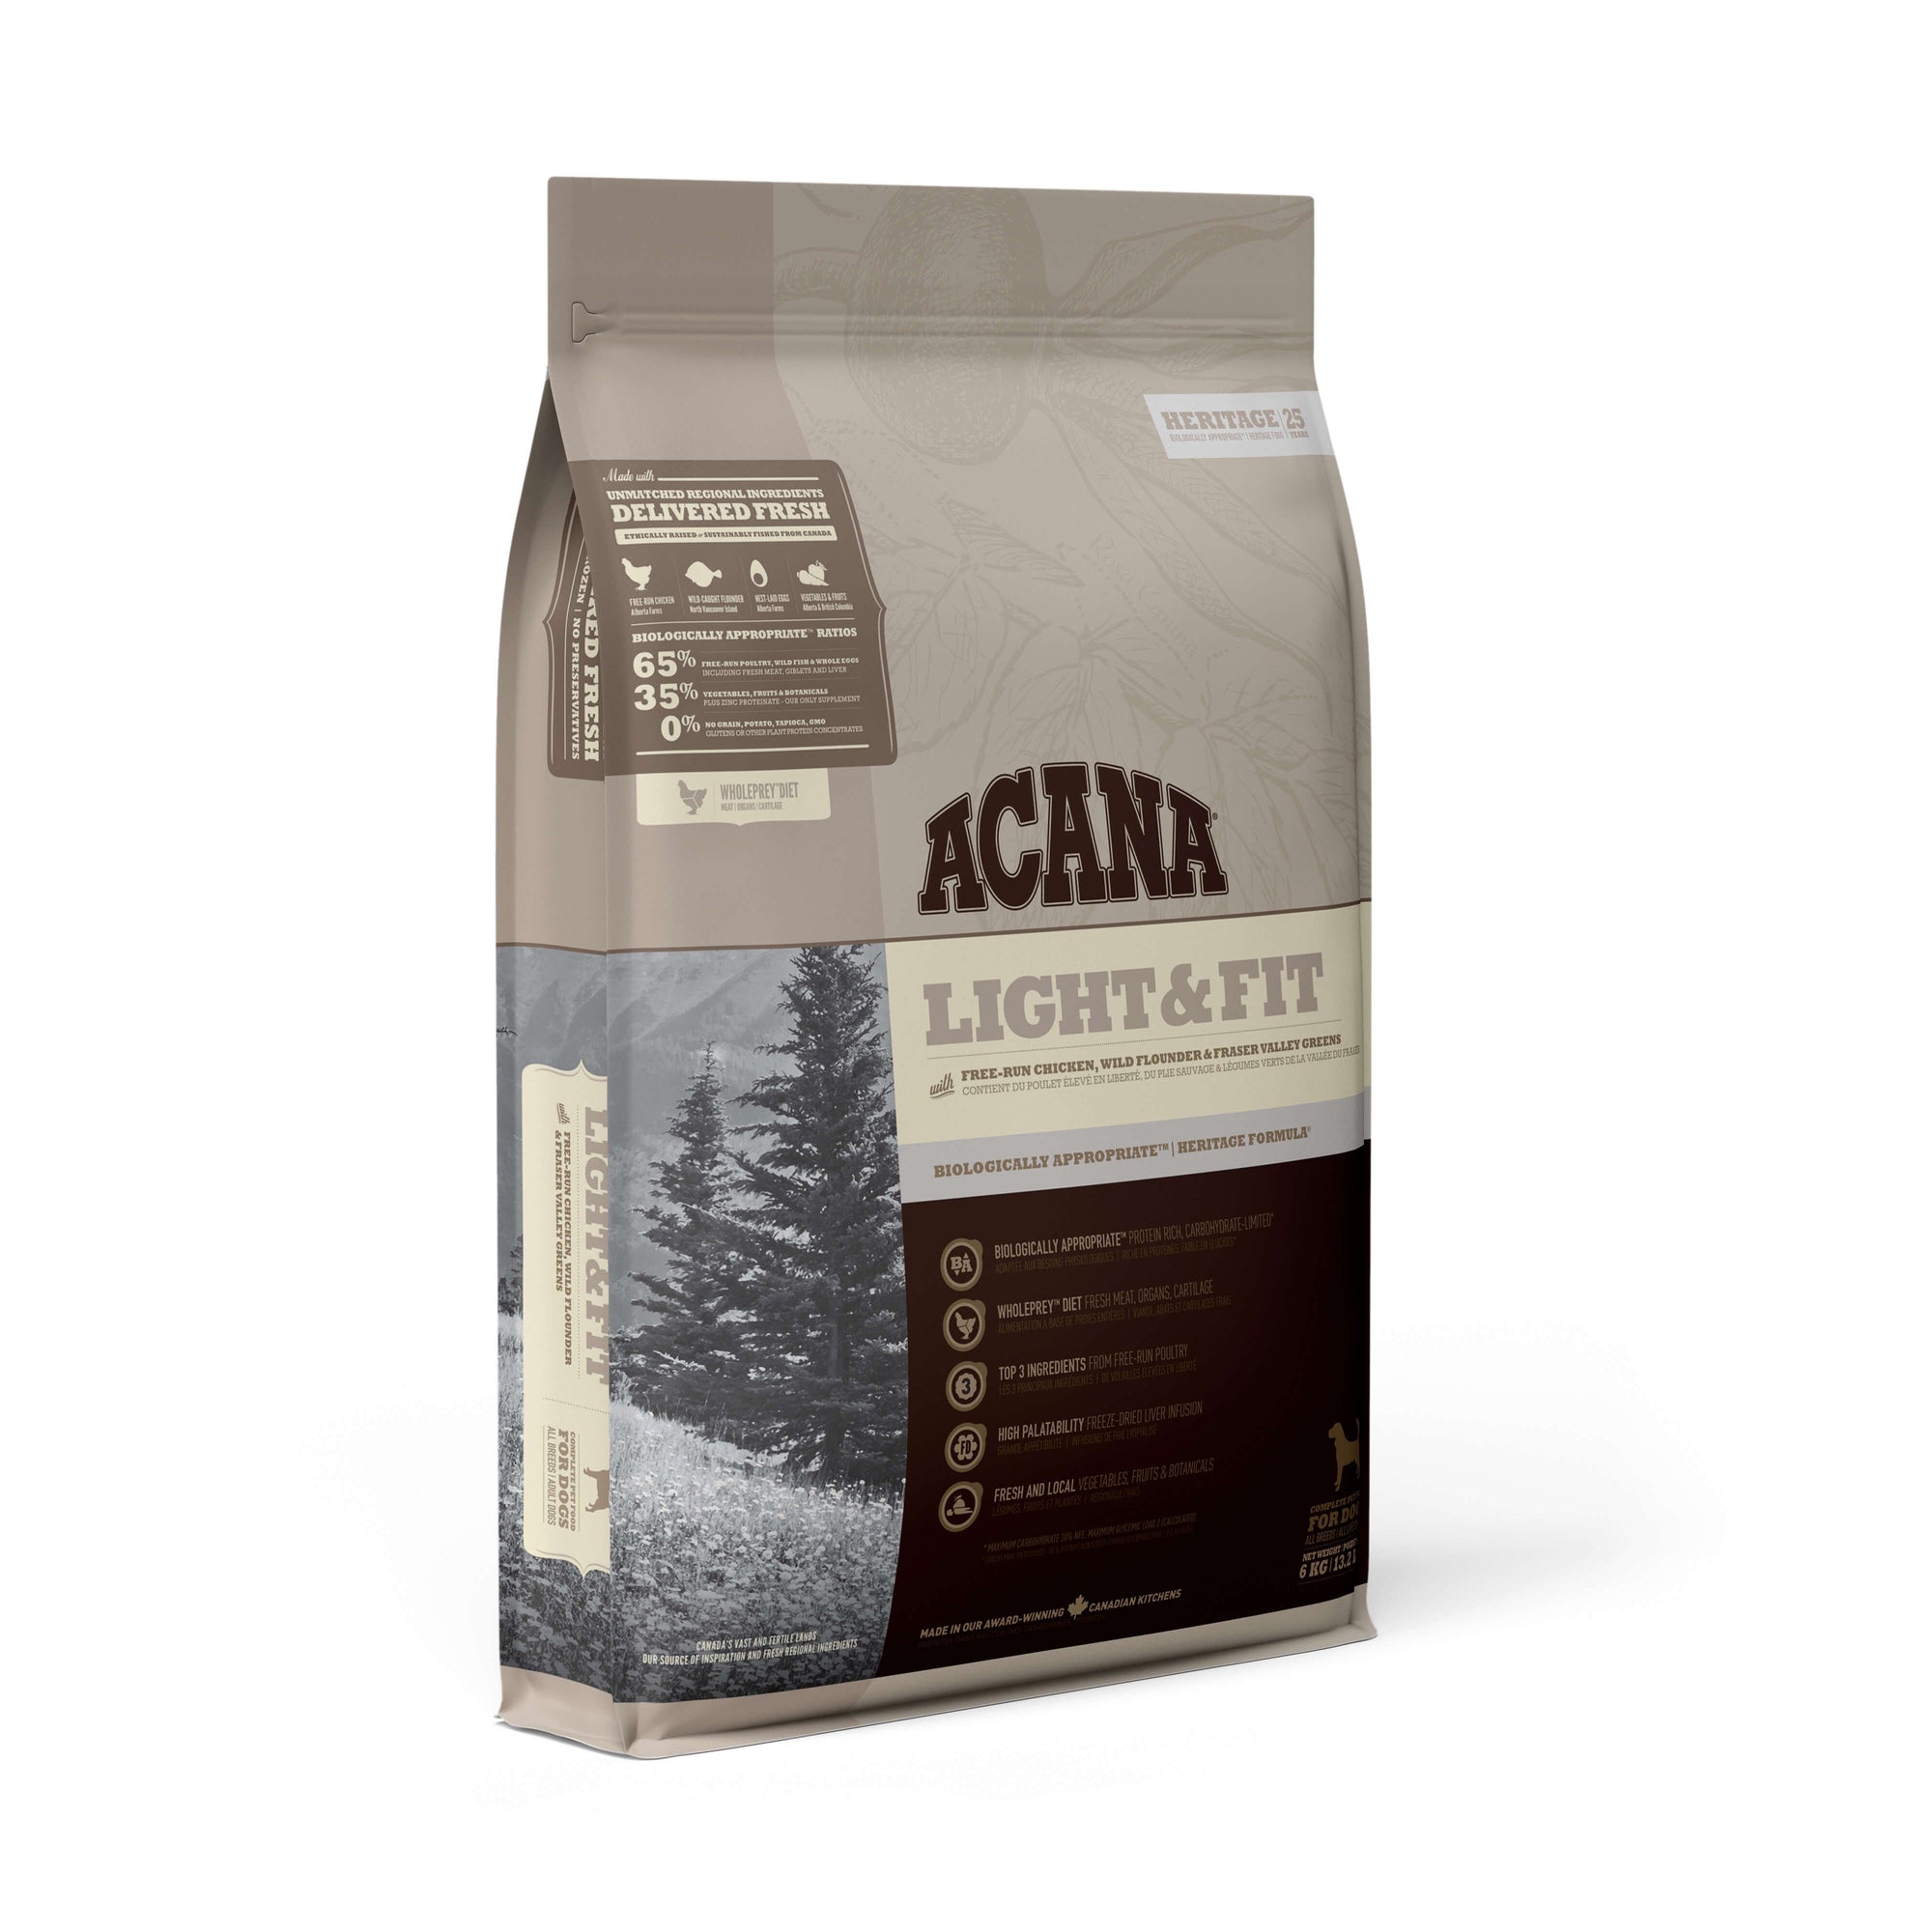 Acana Biscuits 2kg Acana Light and Fit Dog Food